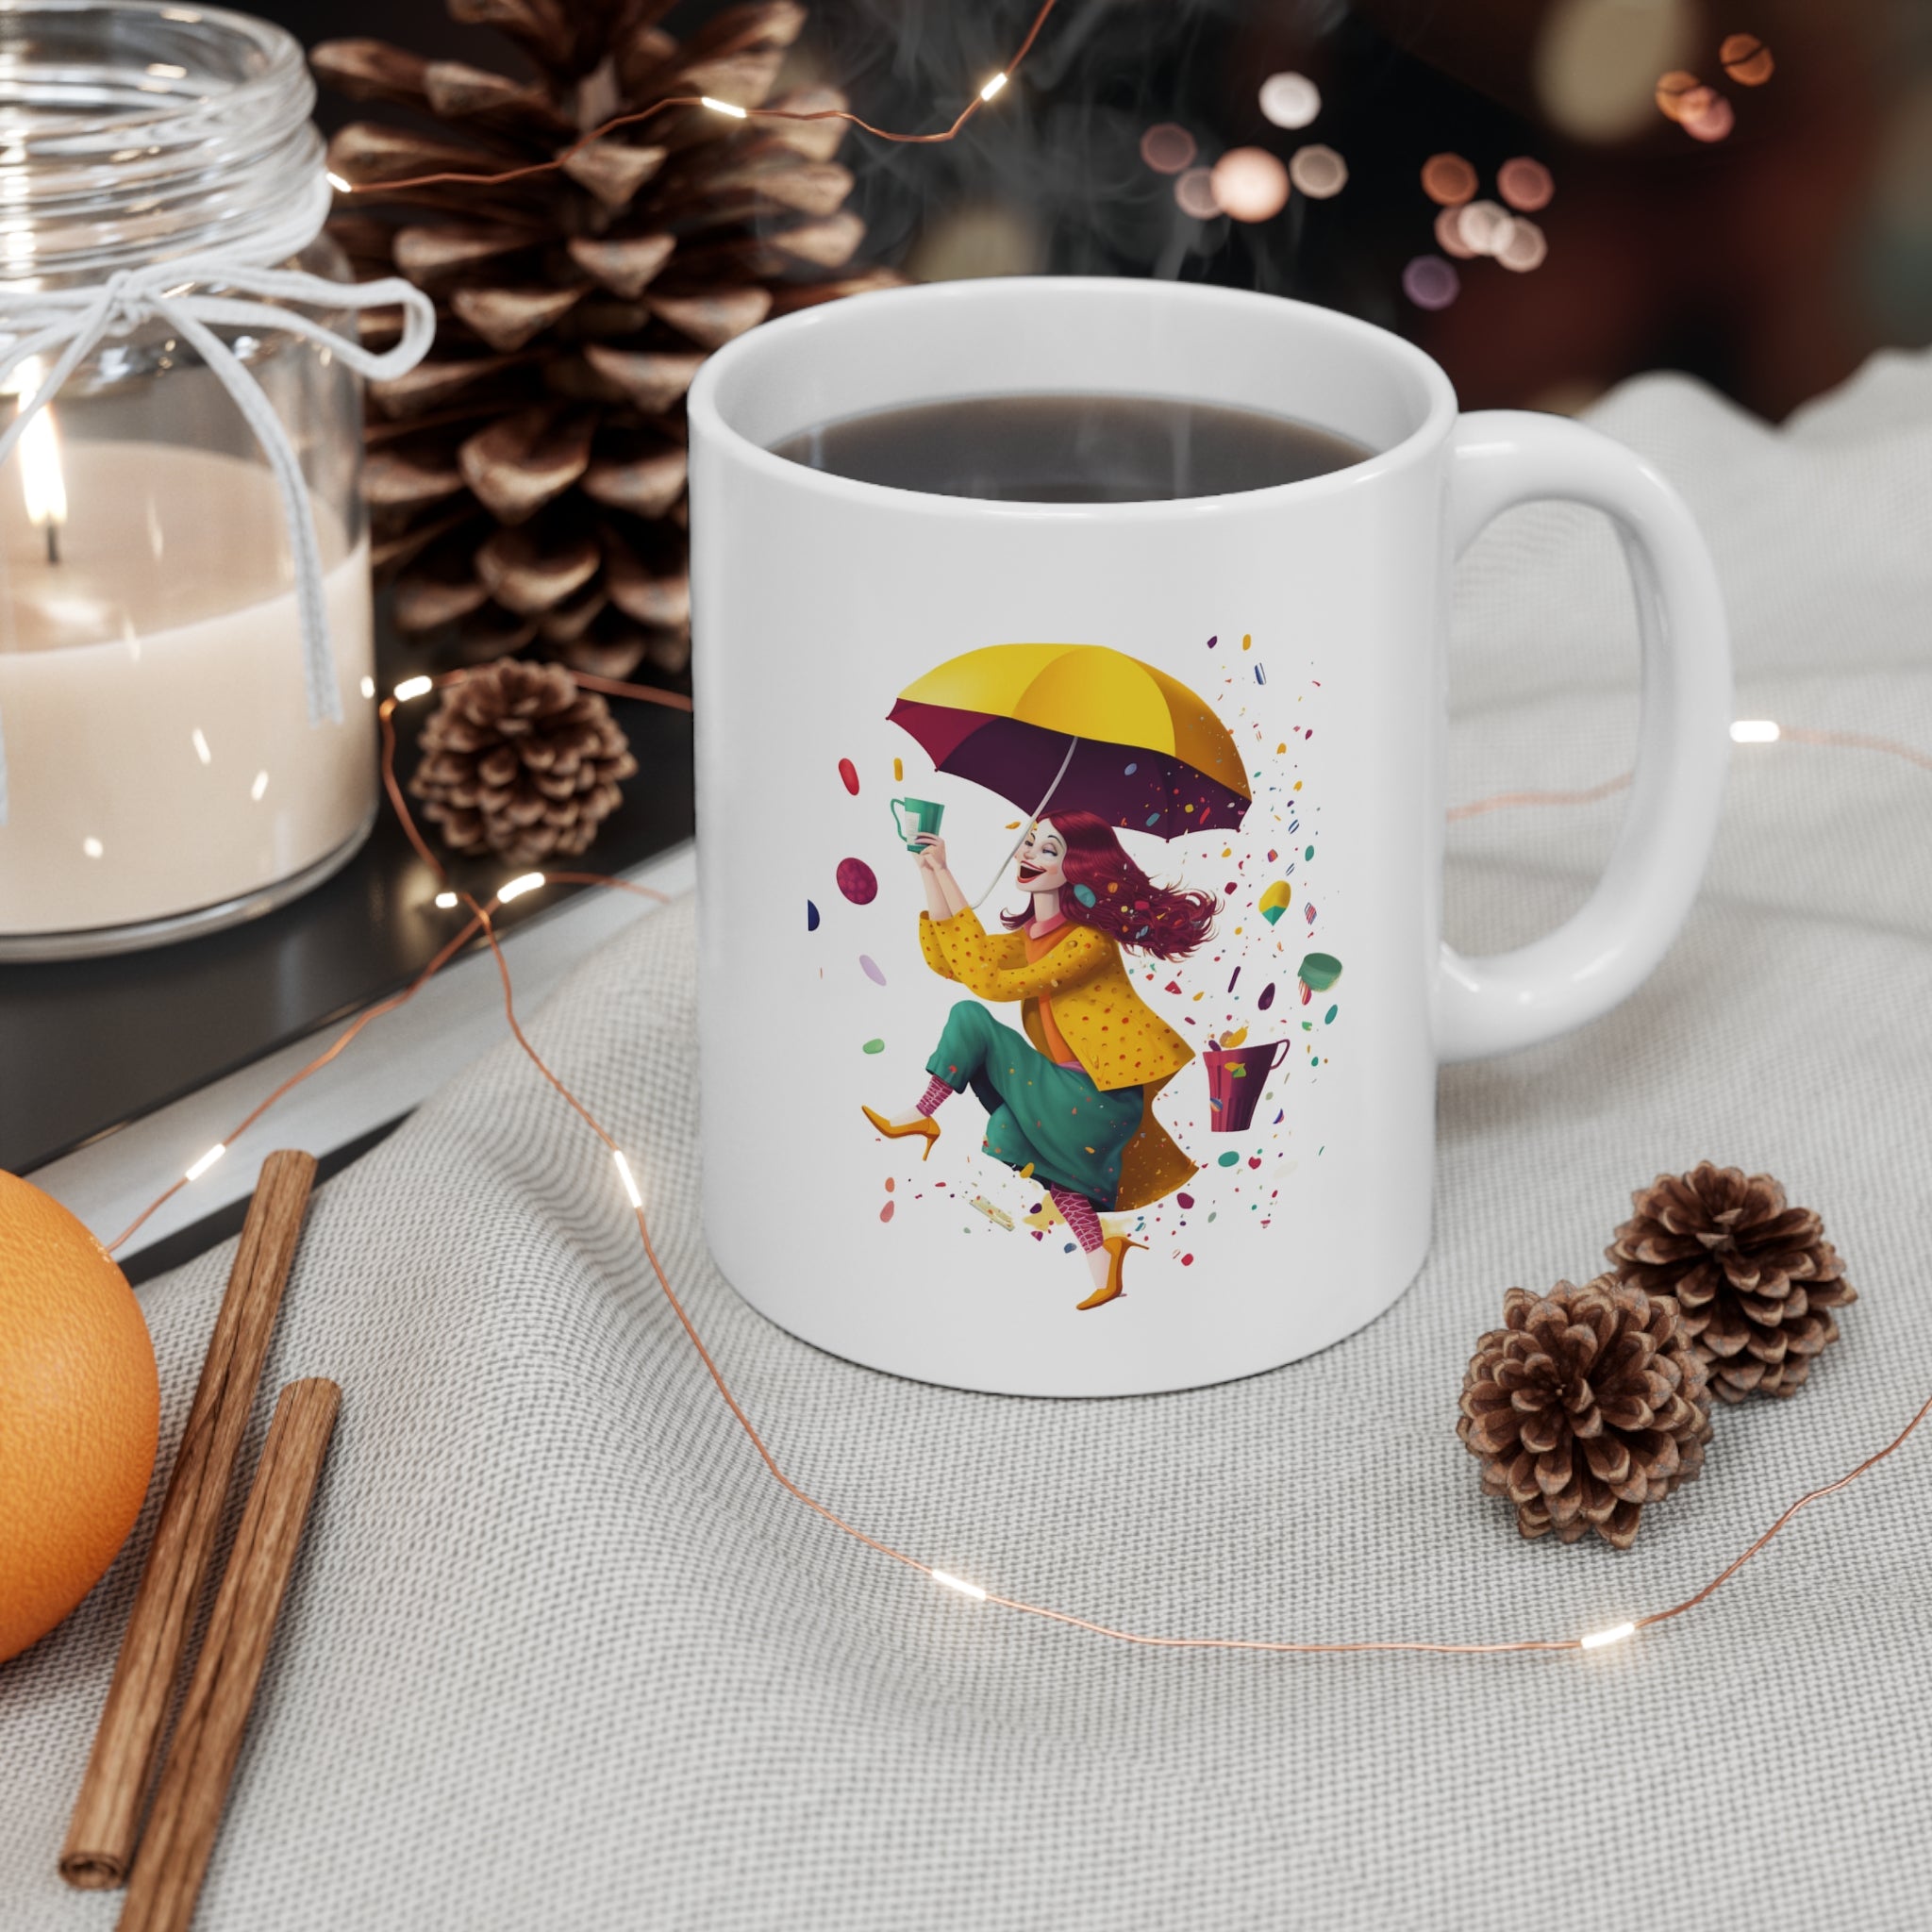 Cute Coffee Mug/ Cup With Happy Teacher Celebrating a Cup of Hot Starbucks Coffee to Start the Day on a Rainy Morning.